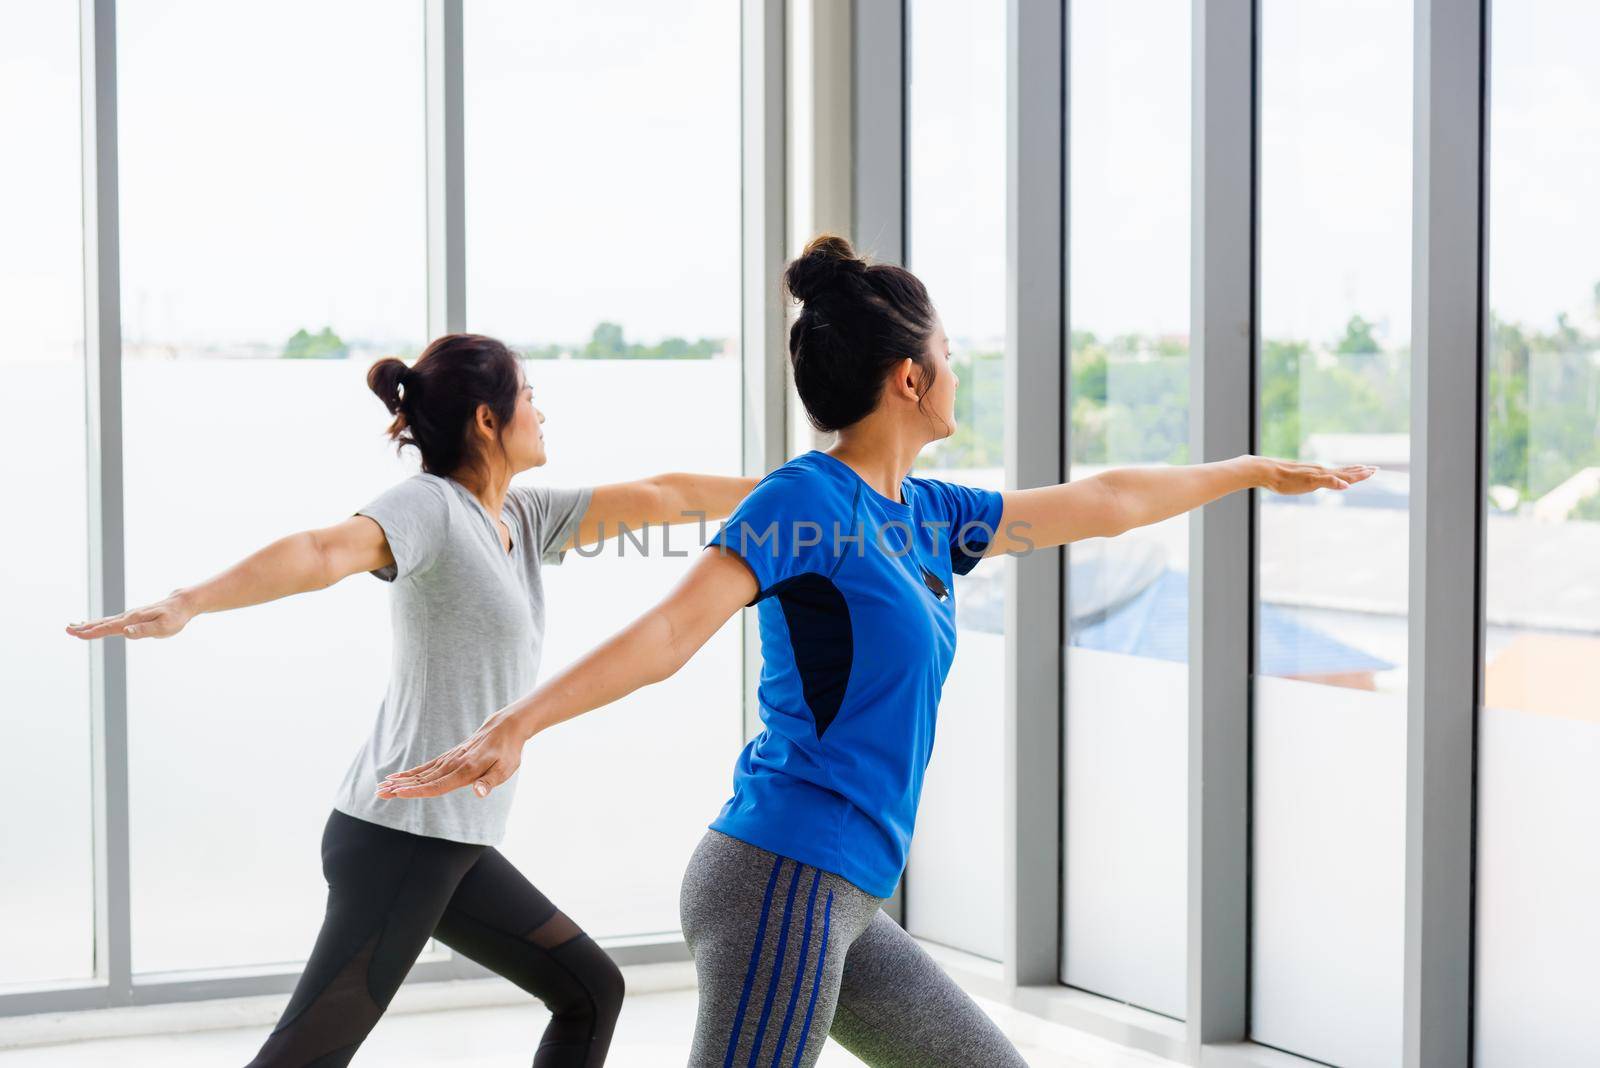 Two Asian women sporty attractive people practicing yoga lesson together by Sorapop